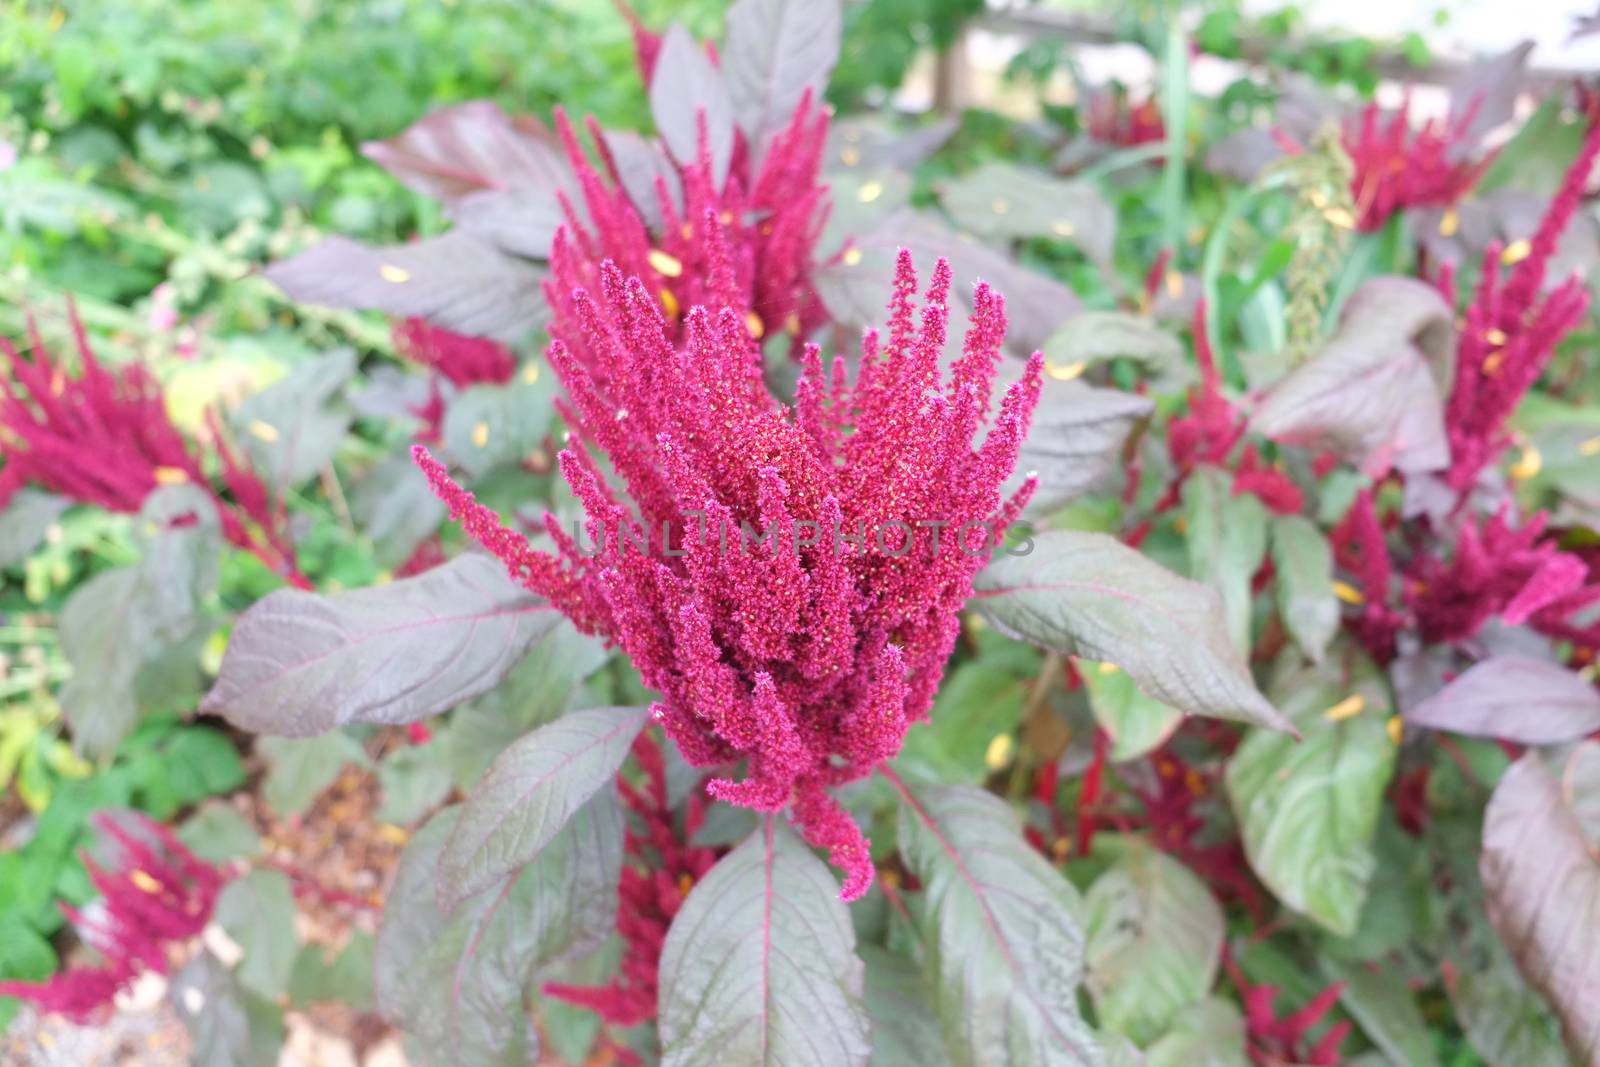 Bright pink astilbe flowers in full bloom on the plant in nature